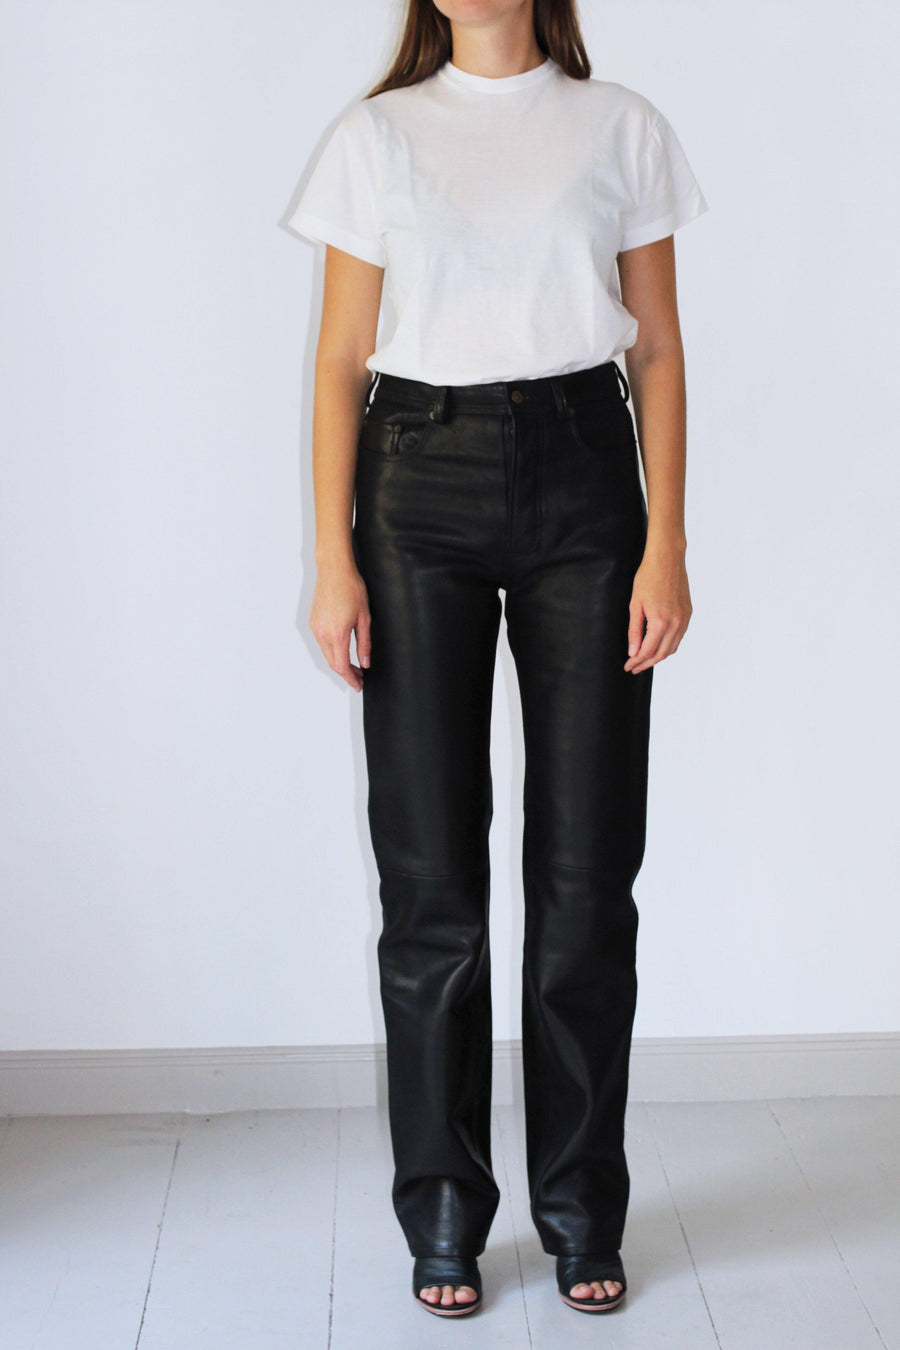 ACNE STUDIOS Leather Pants - The Good Store Berlin